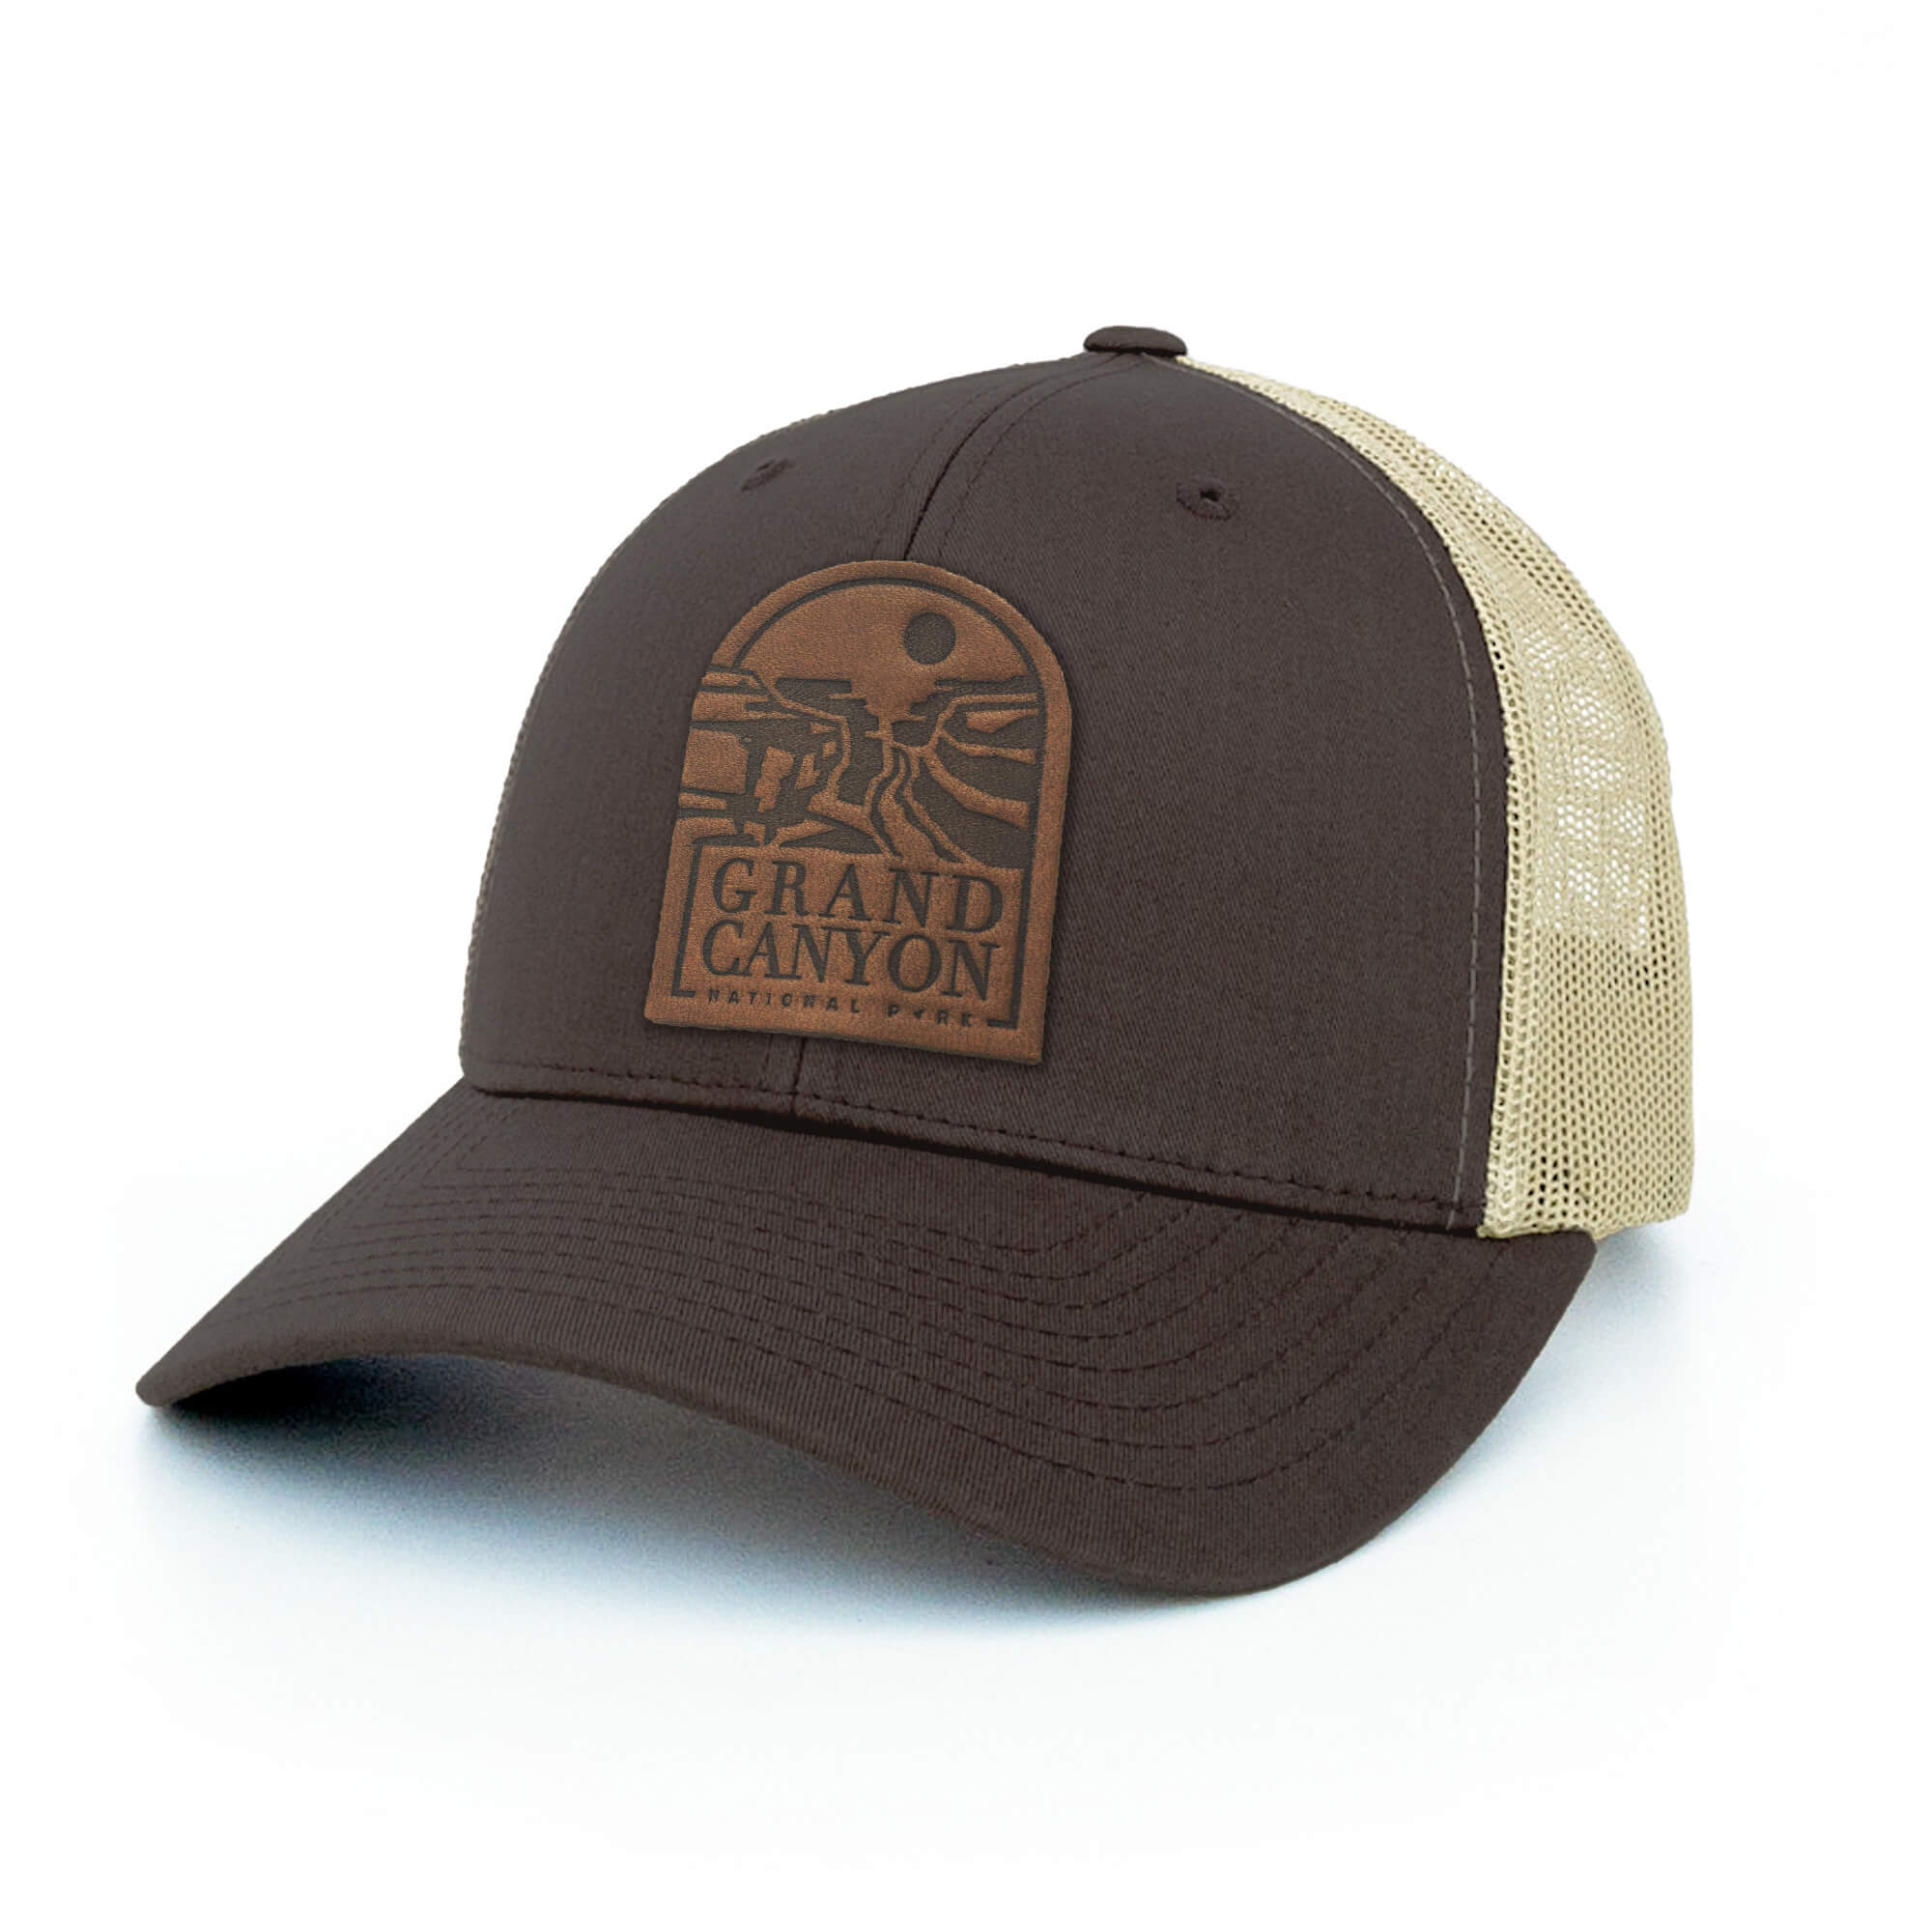 Brown and Khaki trucker hat with full-grain leather patch of Grand Canyon National Park | BLACK-007-004, CHARC-007-004, NAVY-007-004, HGREY-007-004, MOSS-007-004, BROWN-007-004